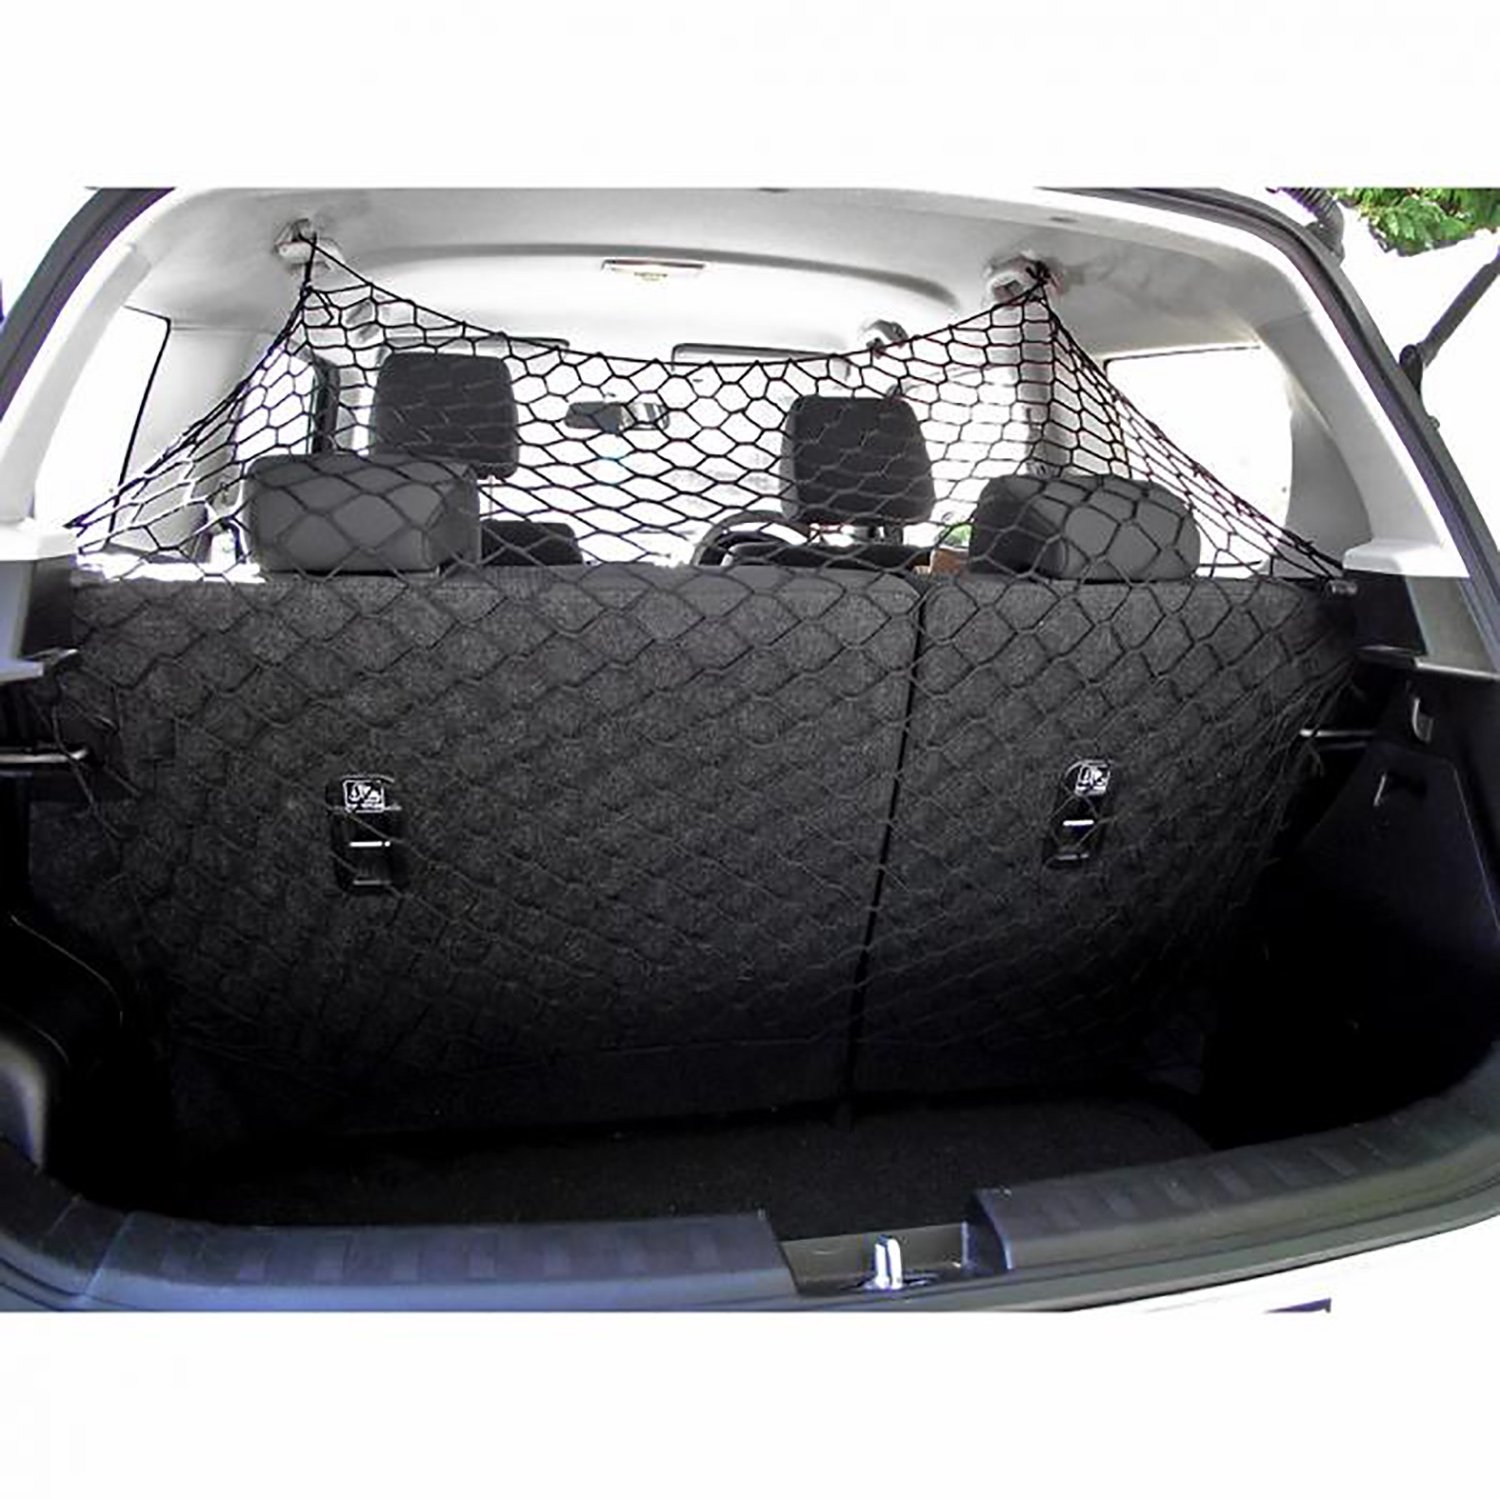 niyin204 Car Pet Barrier Safety Net Universal Mesh Fence Dog Guard Barrier Protector for Car SUV and Truck 120x70cm wonderful Van 